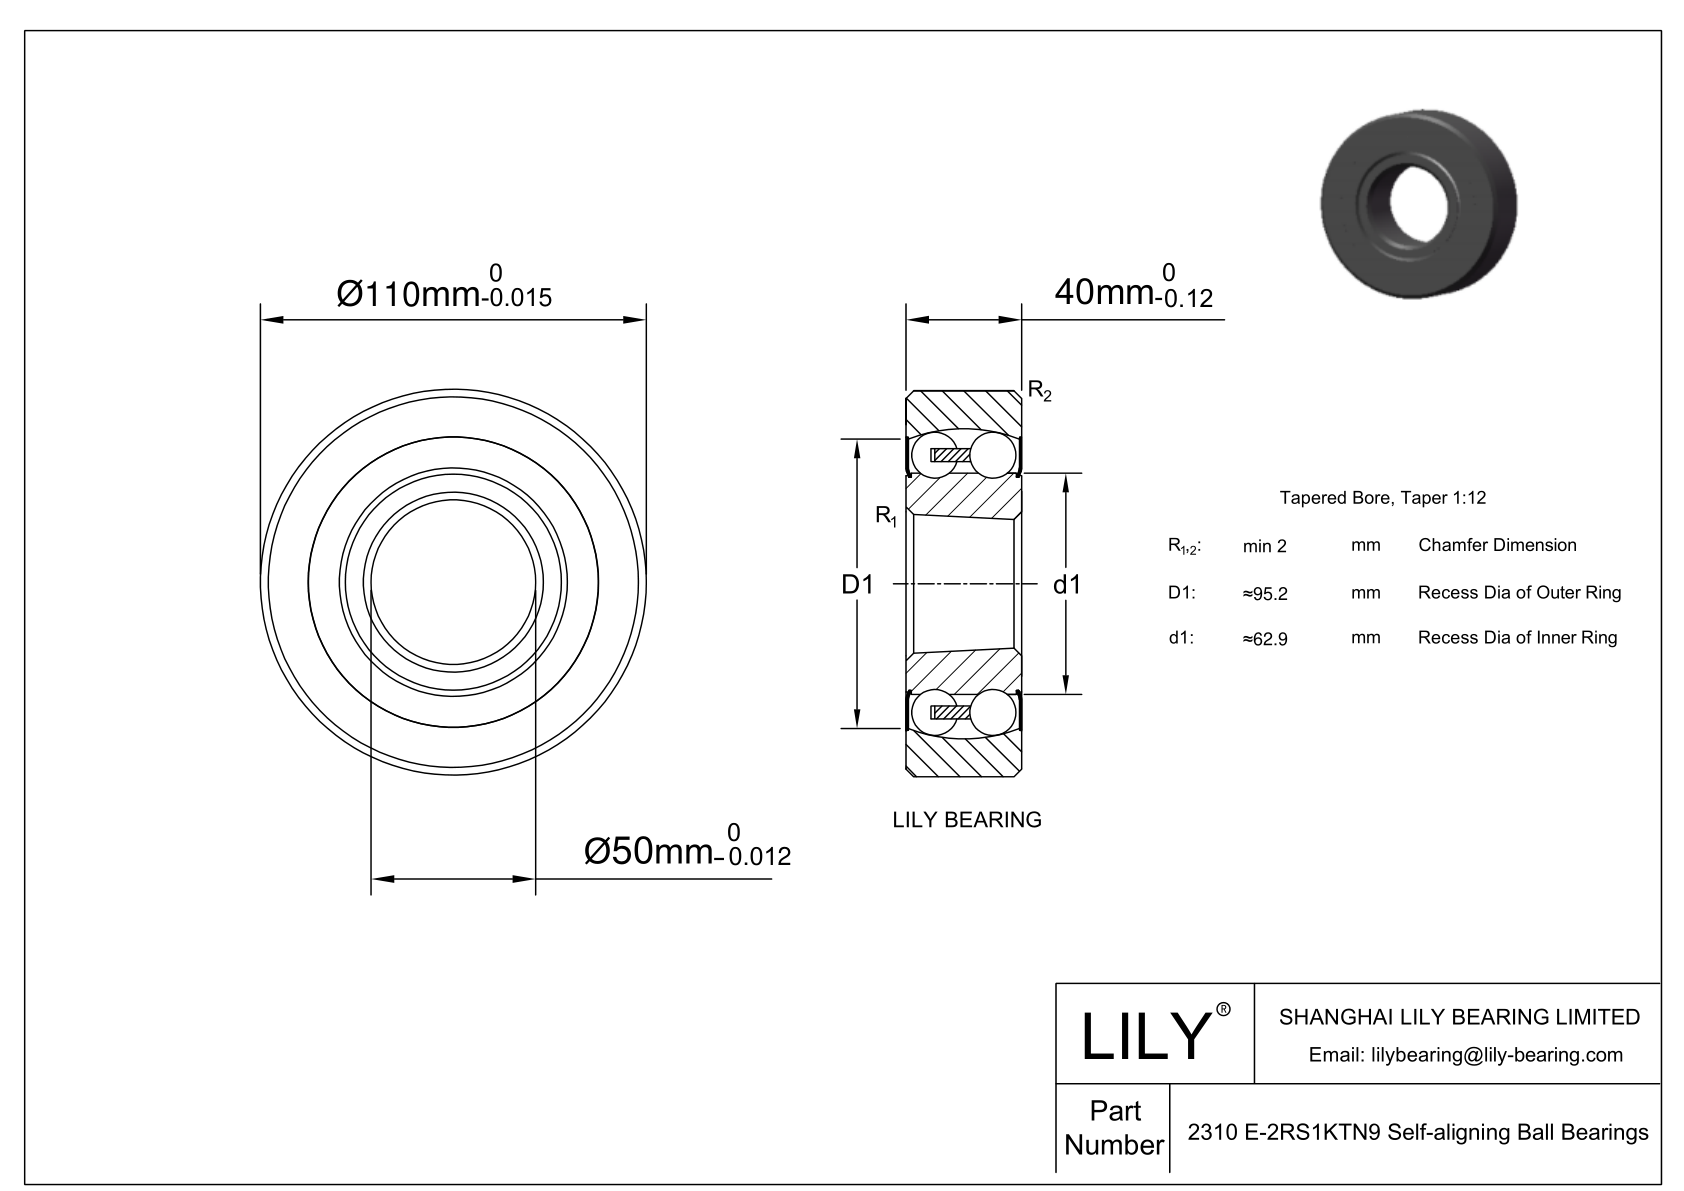 CE2310 E-SCPP Silicon Carbide Self Aligning Ball Bearings cad drawing